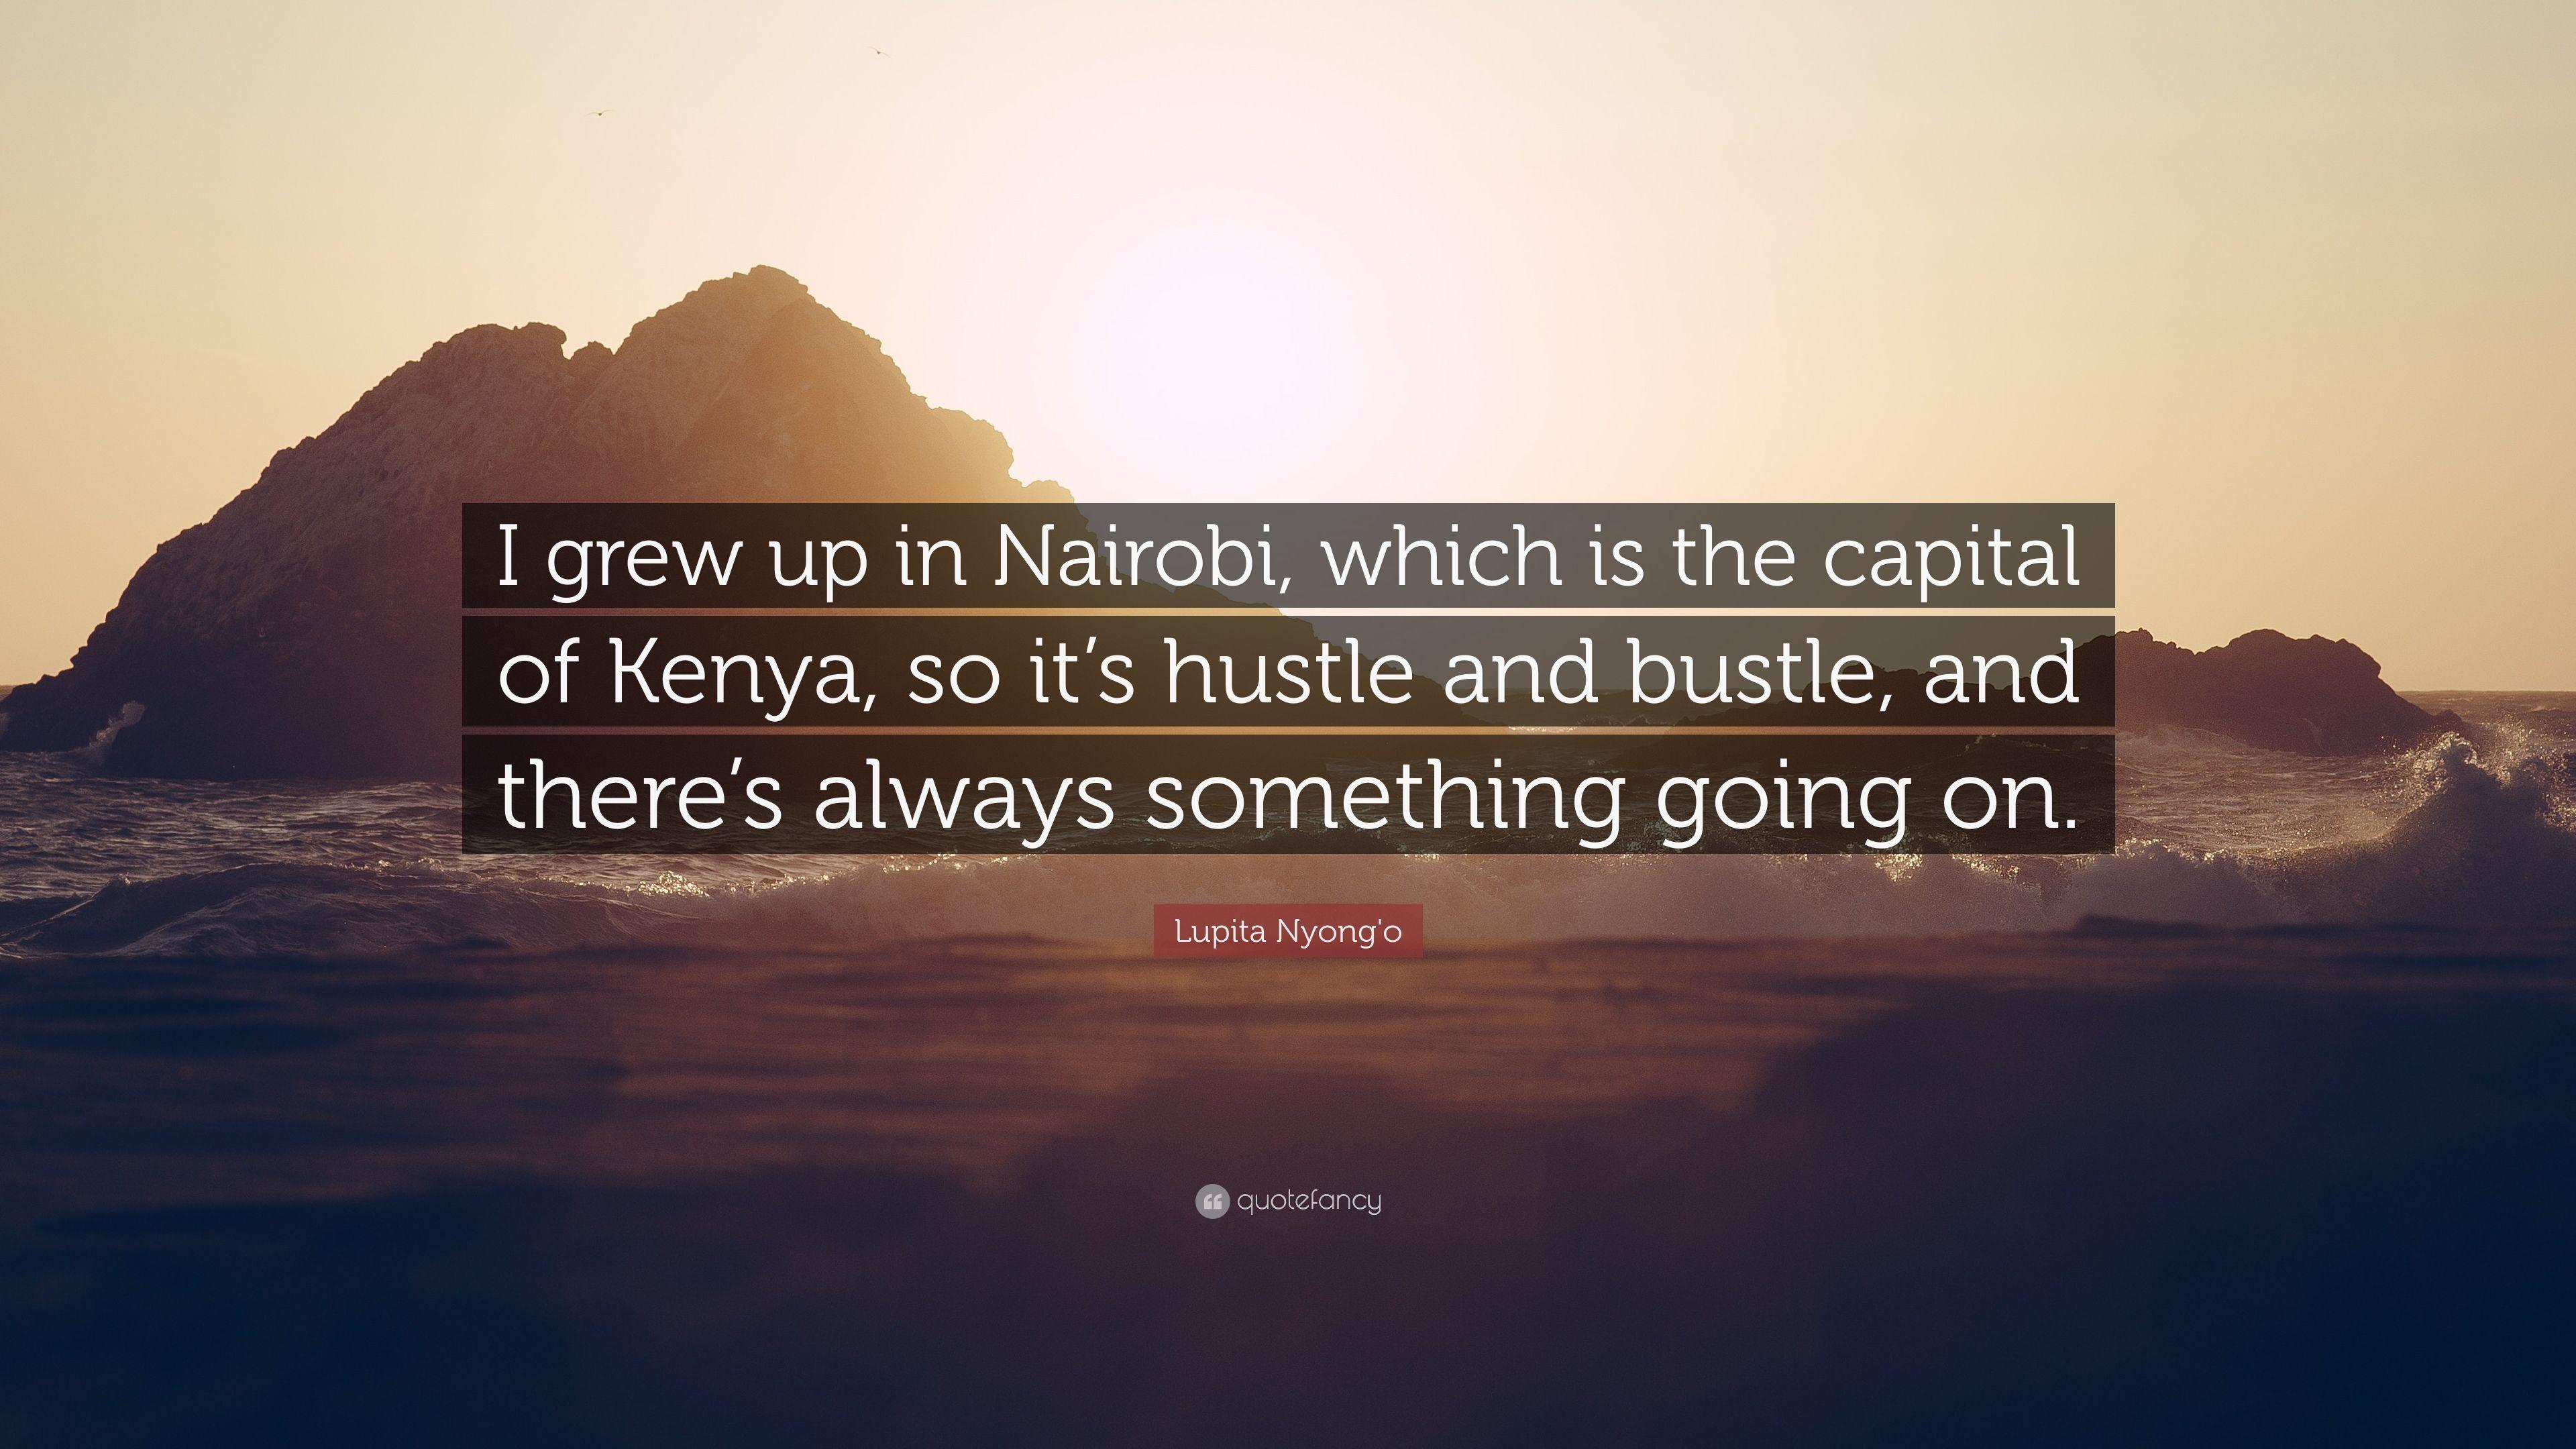 Lupita Nyong'o Quote: “I grew up in Nairobi, which is the capital